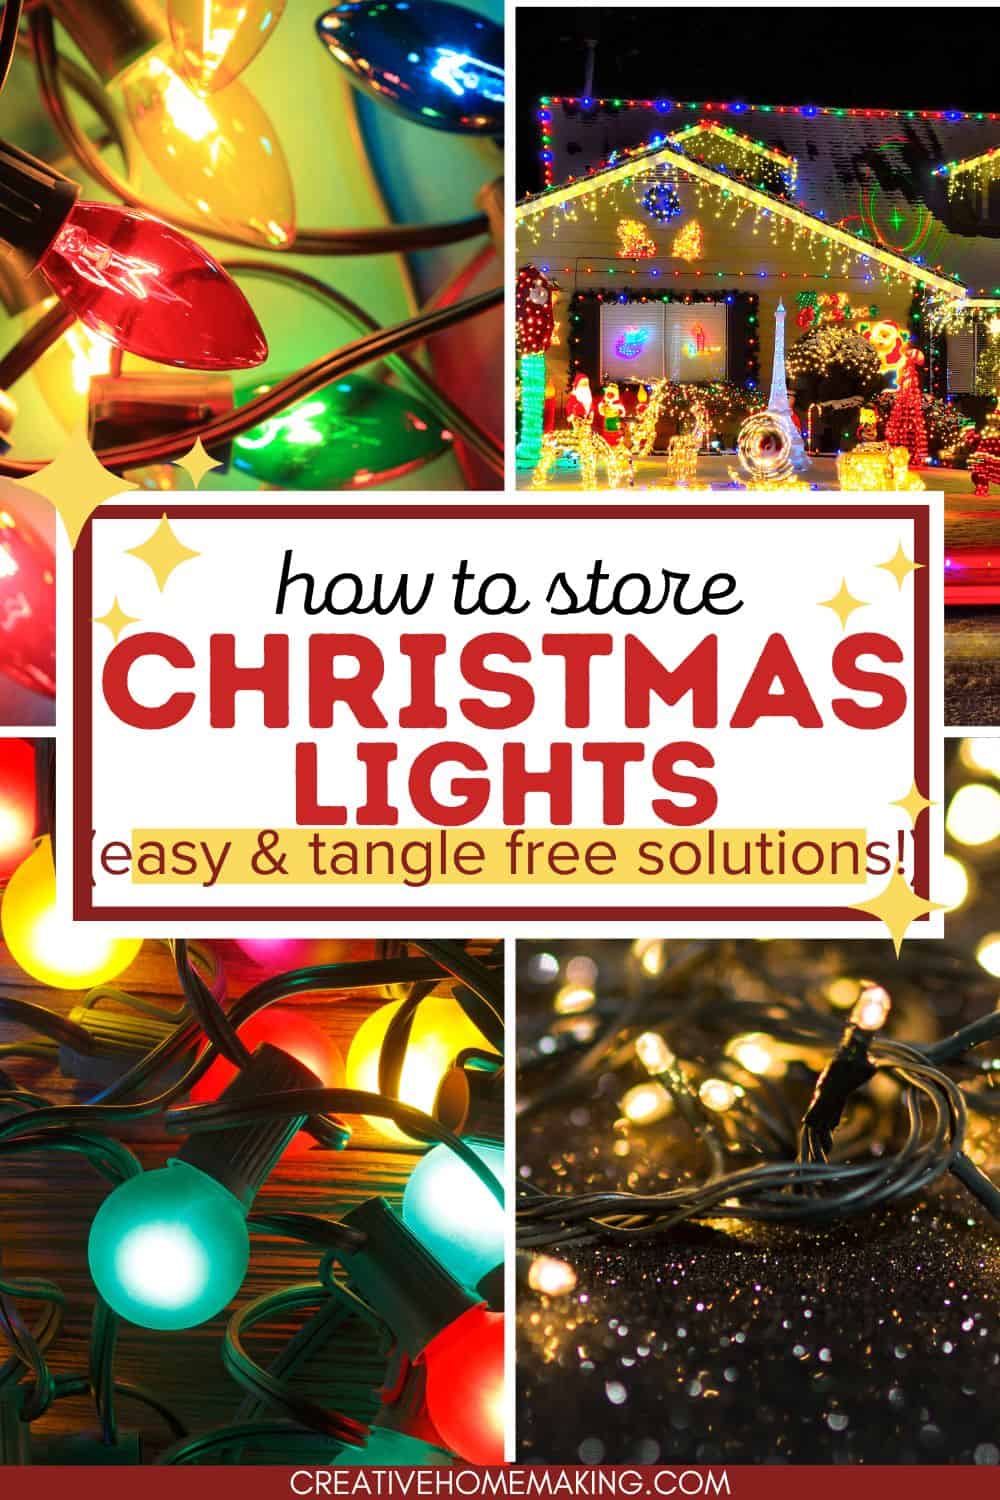 How to Store Christmas Lights: Easy and Tangle-Free Solutions